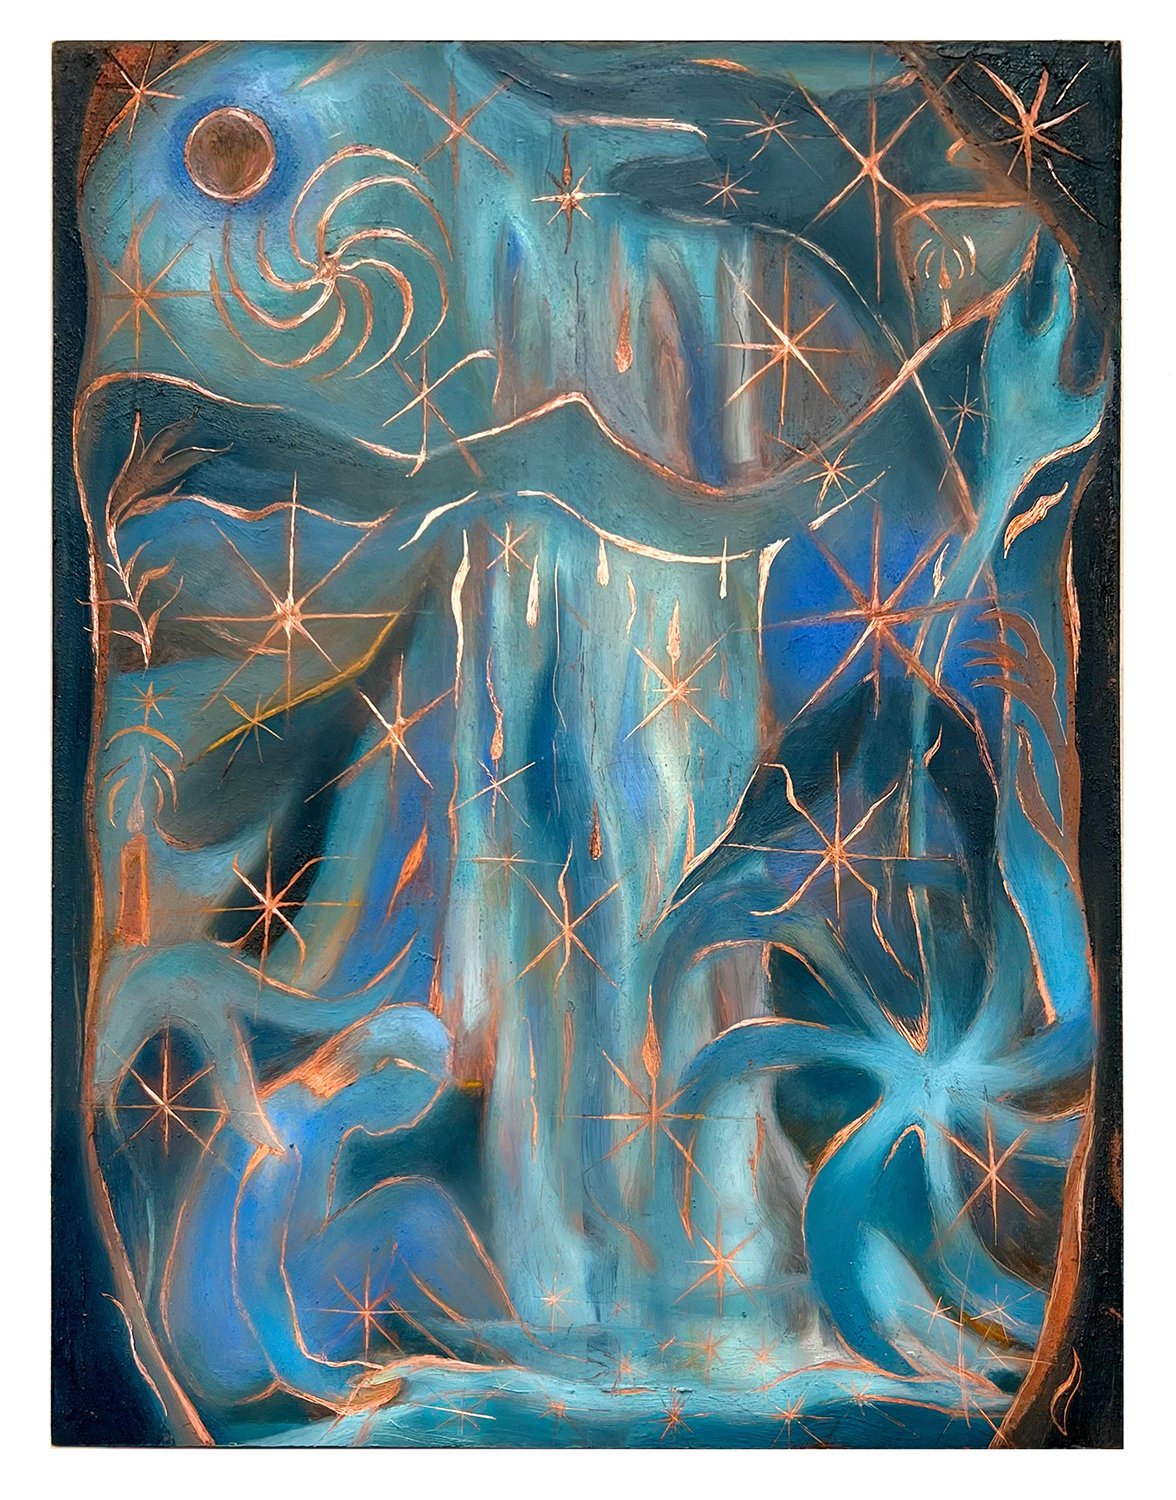 Journey-To-The-Inner-Mind_Oil-and-Wax-on-Copper_12x9'_Margaret-R-Thompson.WEB.jpg